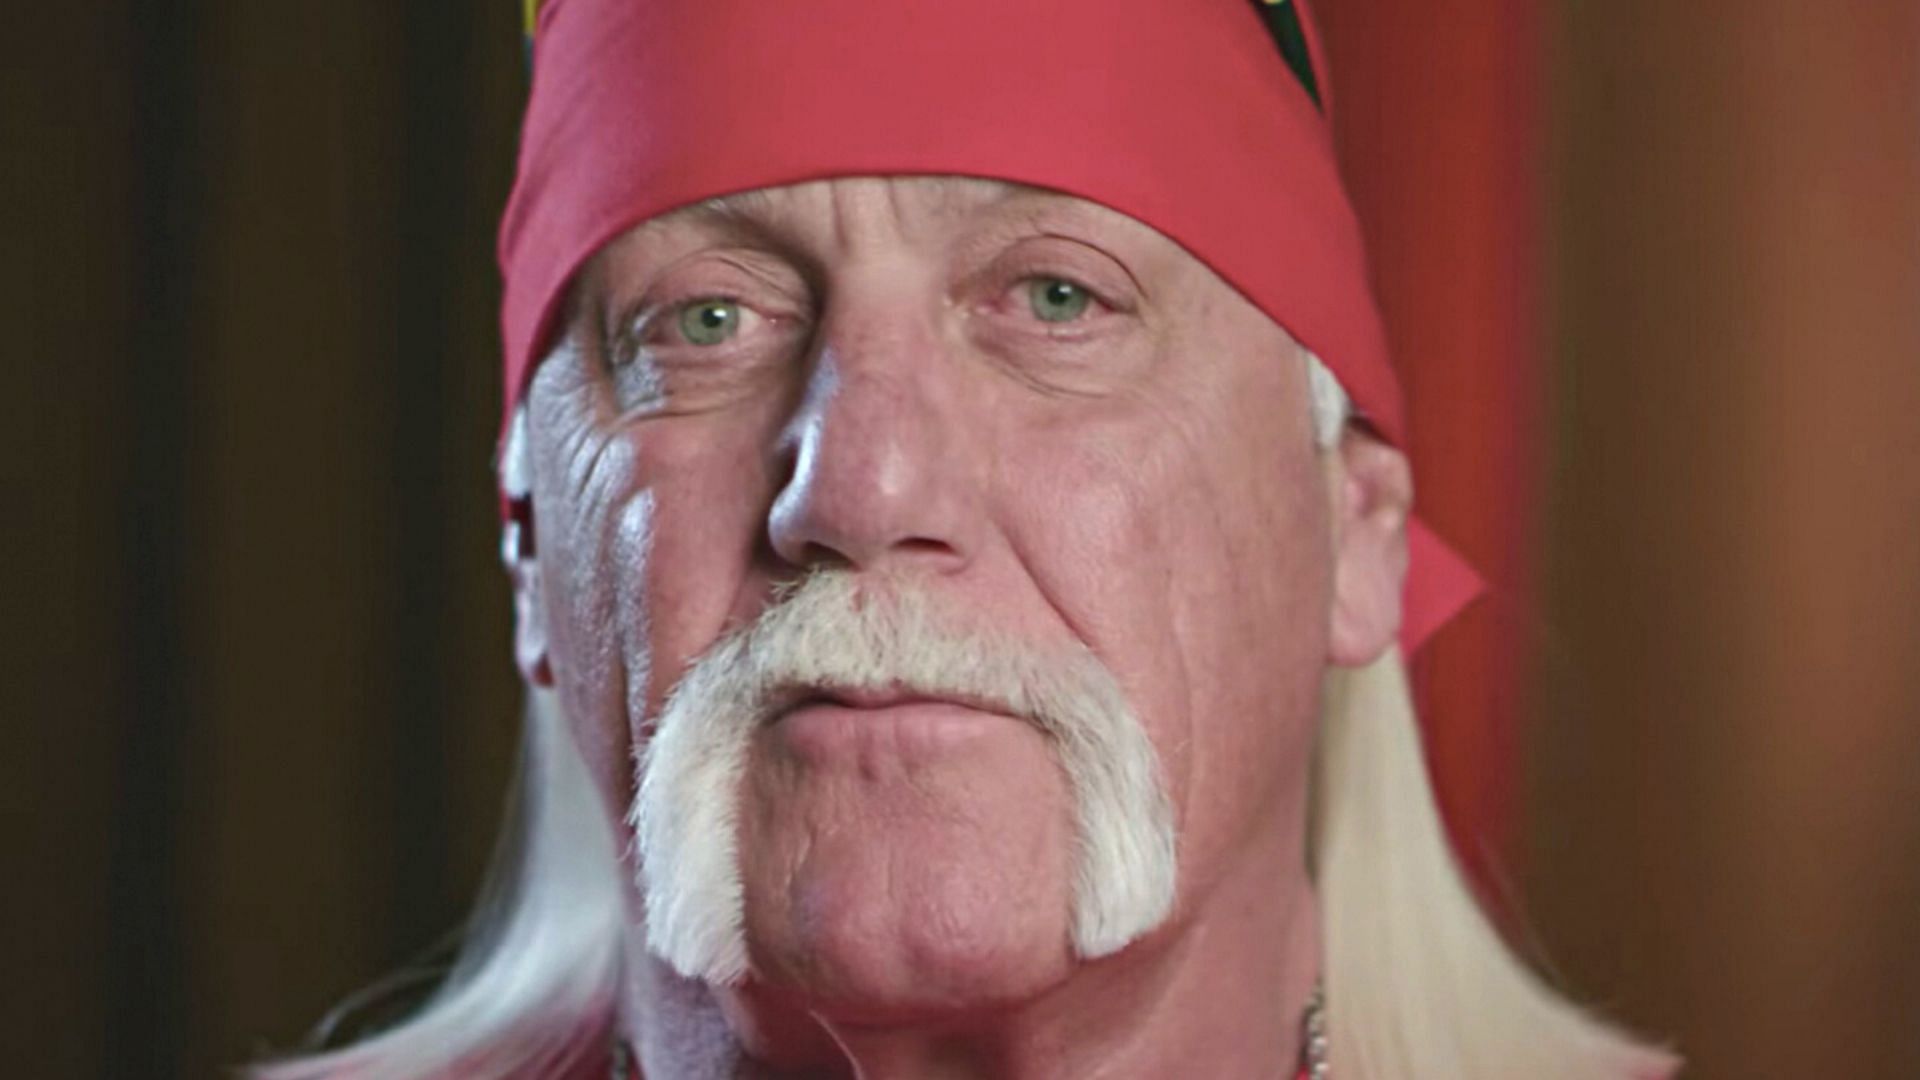 Hulk Hogan is one of the greatest superstars in professional wrestling history.